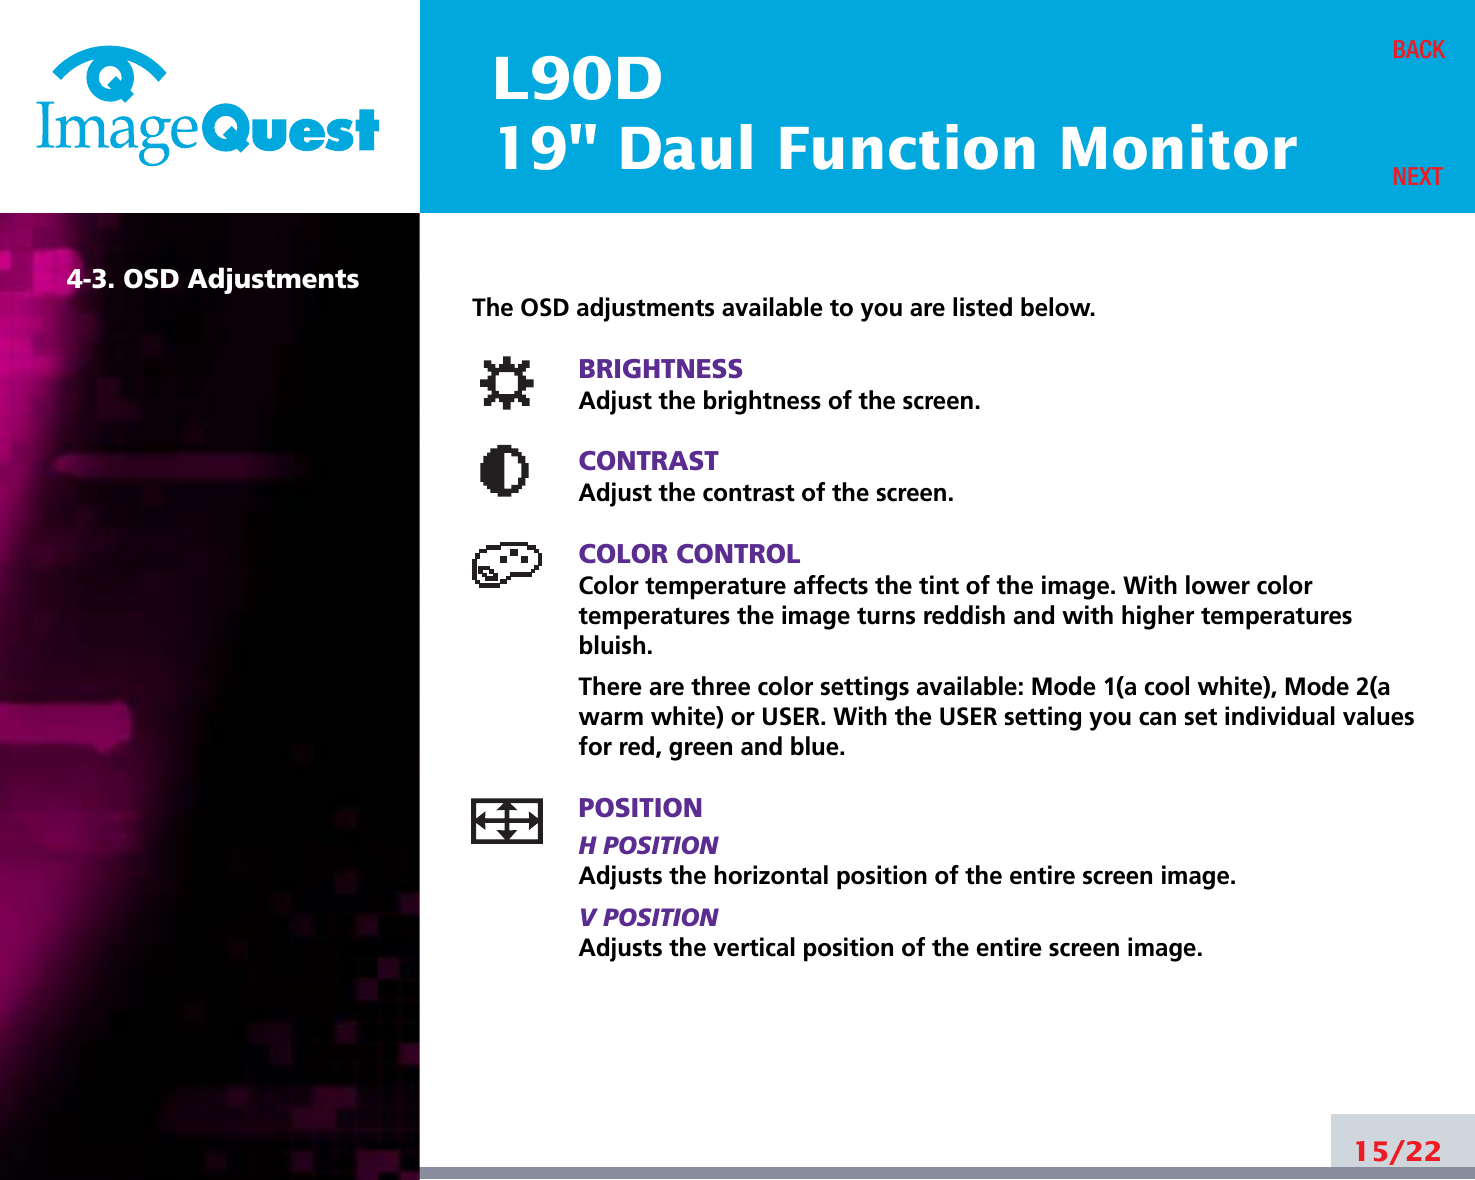 L90D19&quot; Daul Function Monitor15/22BACKNEXT4-3. OSD AdjustmentsThe OSD adjustments available to you are listed below.BRIGHTNESSAdjust the brightness of the screen.CONTRASTAdjust the contrast of the screen.COLOR CONTROLColor temperature affects the tint of the image. With lower color temperatures the image turns reddish and with higher temperatures bluish.There are three color settings available: Mode 1(a cool white), Mode 2(awarm white) or USER. With the USER setting you can set individual valuesfor red, green and blue.POSITIONH POSITIONAdjusts the horizontal position of the entire screen image.V POSITIONAdjusts the vertical position of the entire screen image.